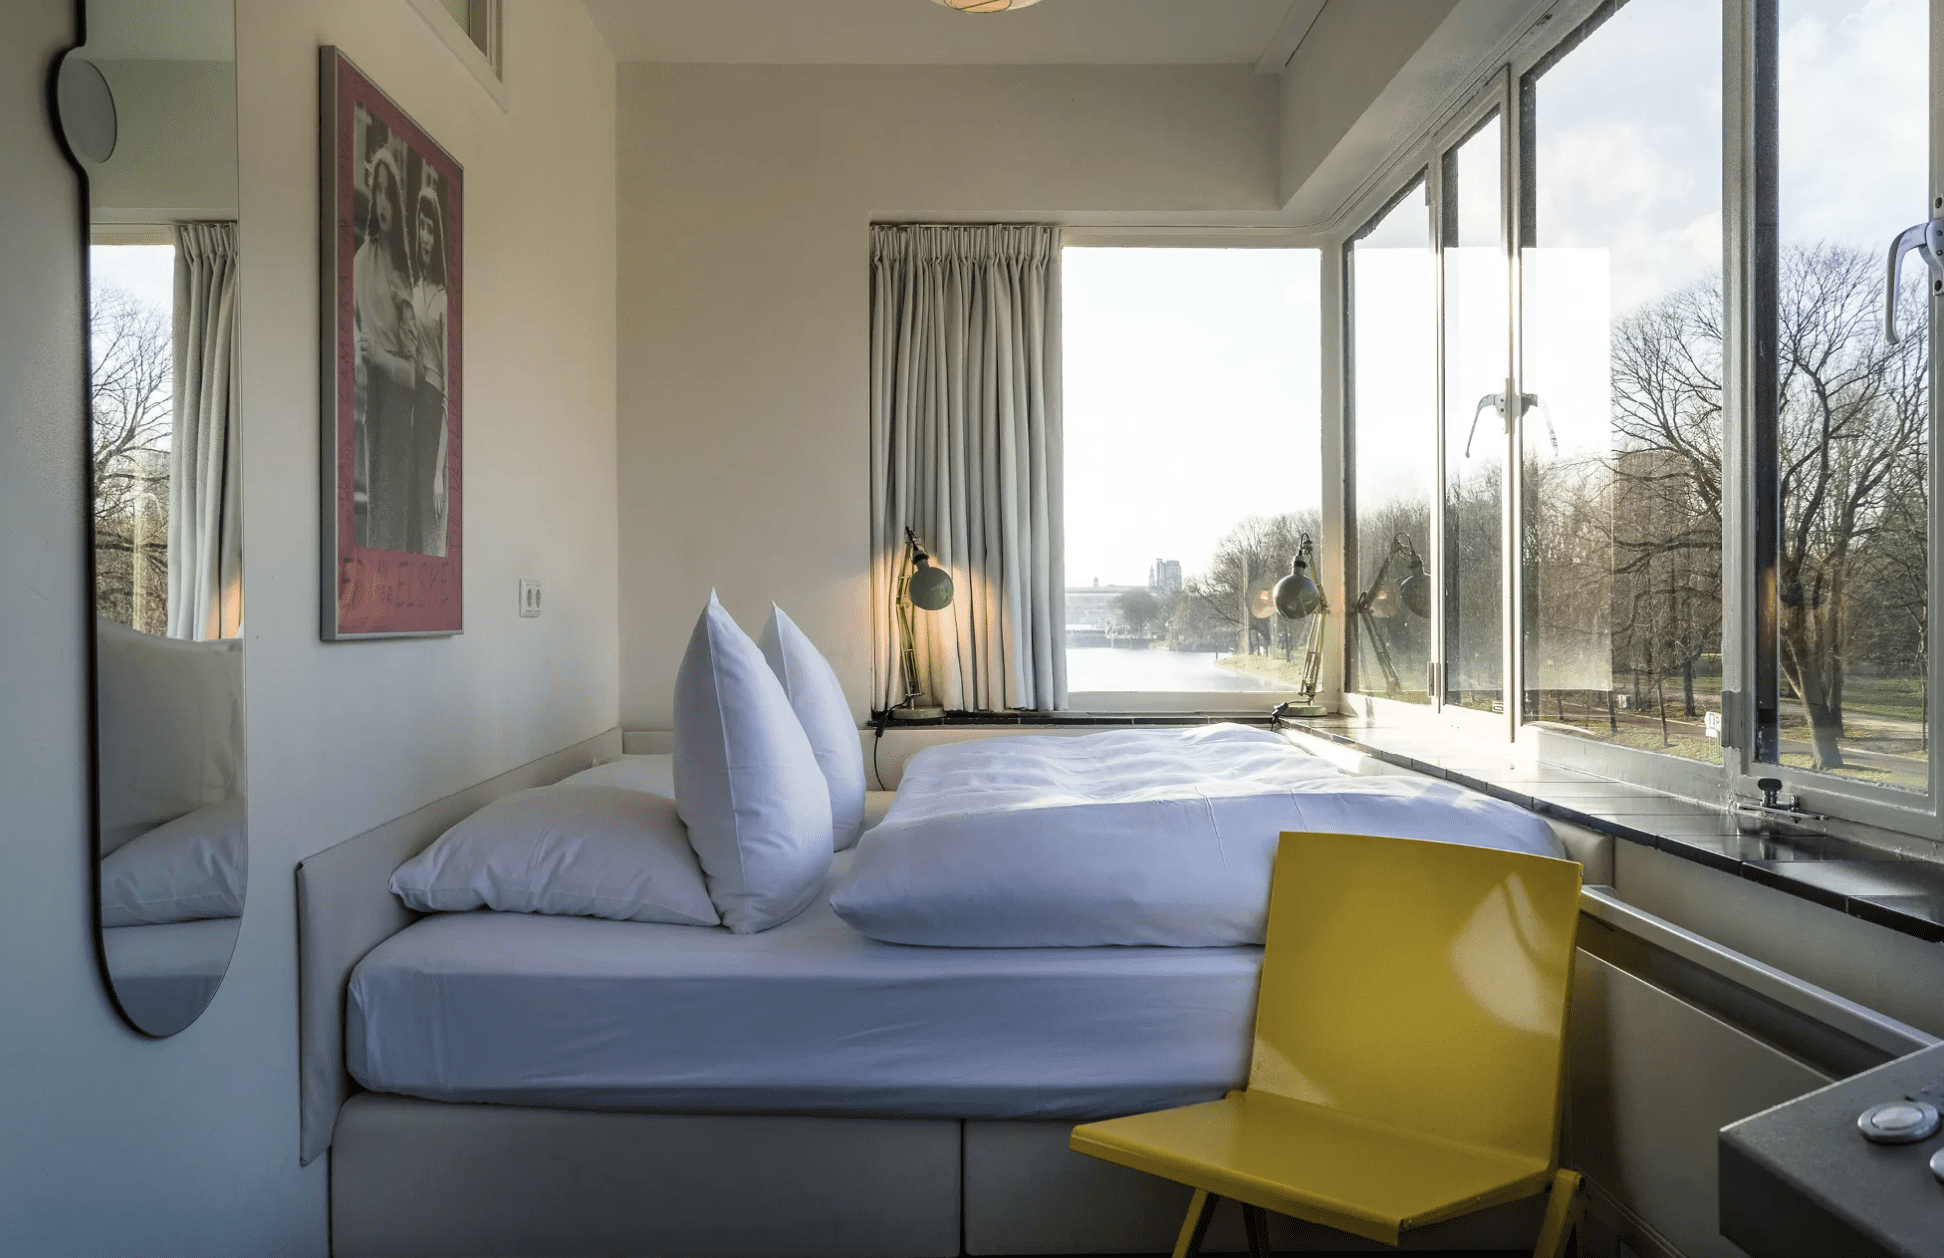 The best hotels in Amsterdam | The Sweets Hotel has large windows letting natural light in the room